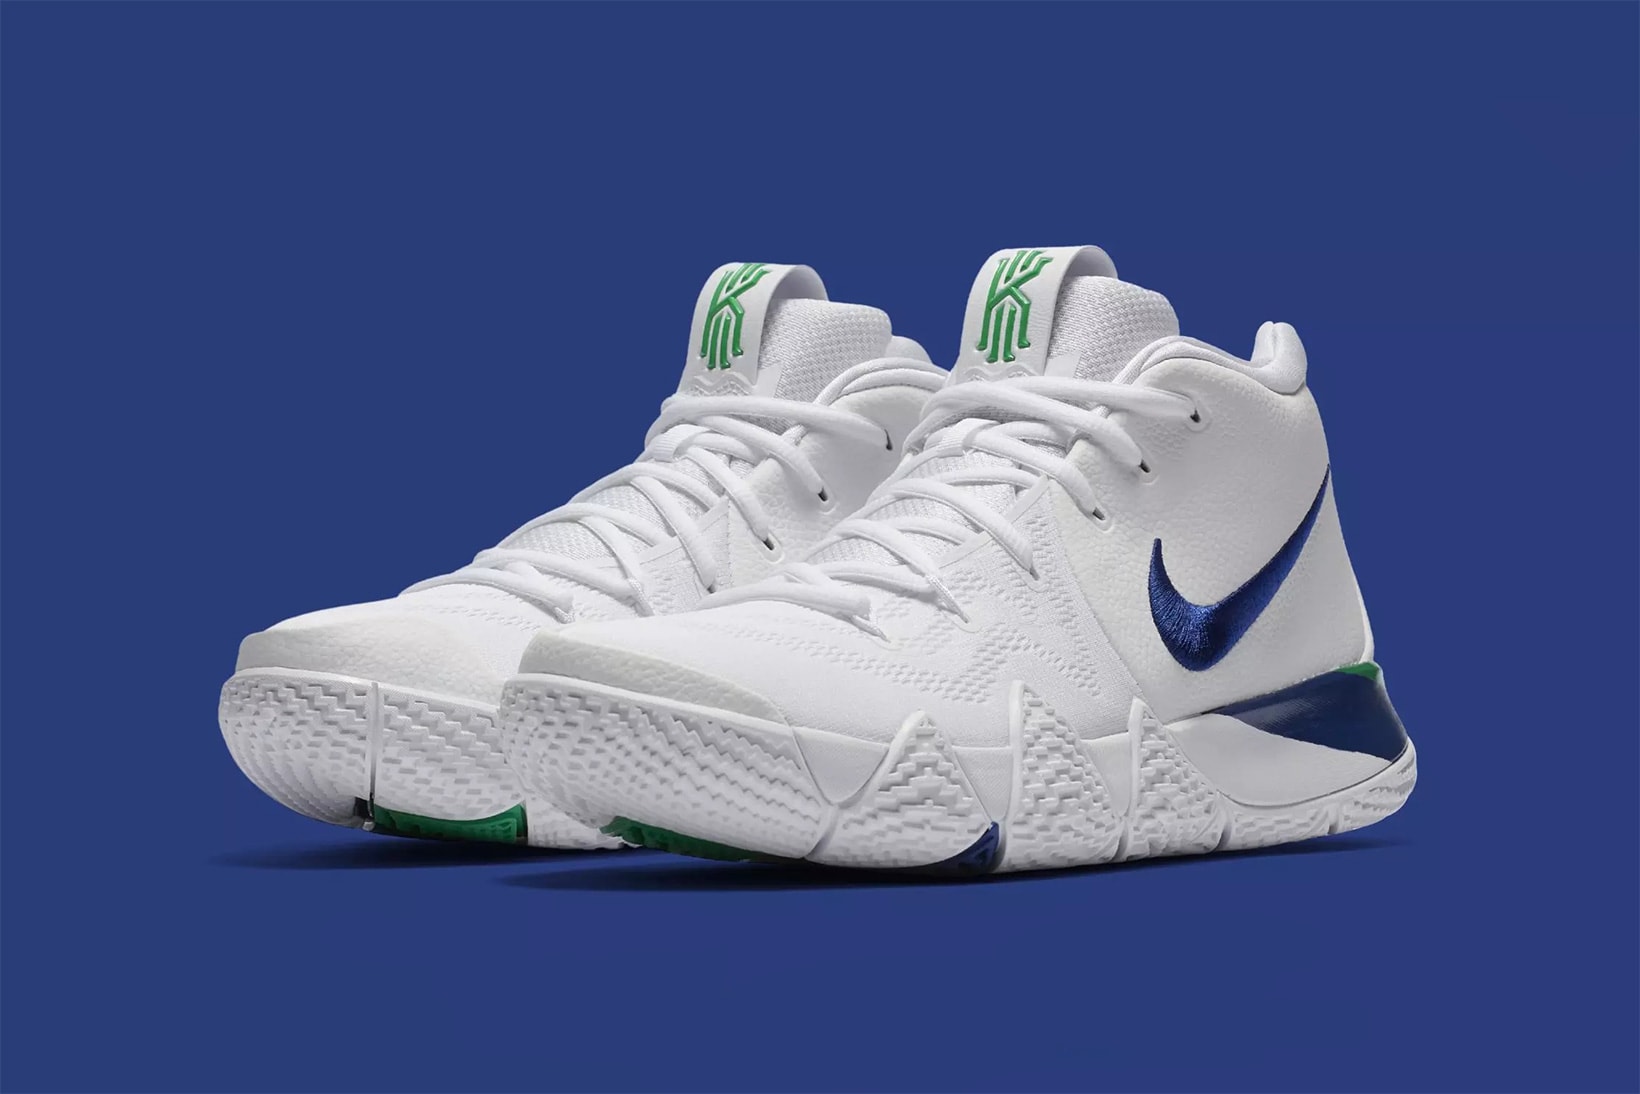 Nike Kyrie 4 white deep royal blue footwear april 2018 kyrie irving nike basketball release date info sneakers shoes